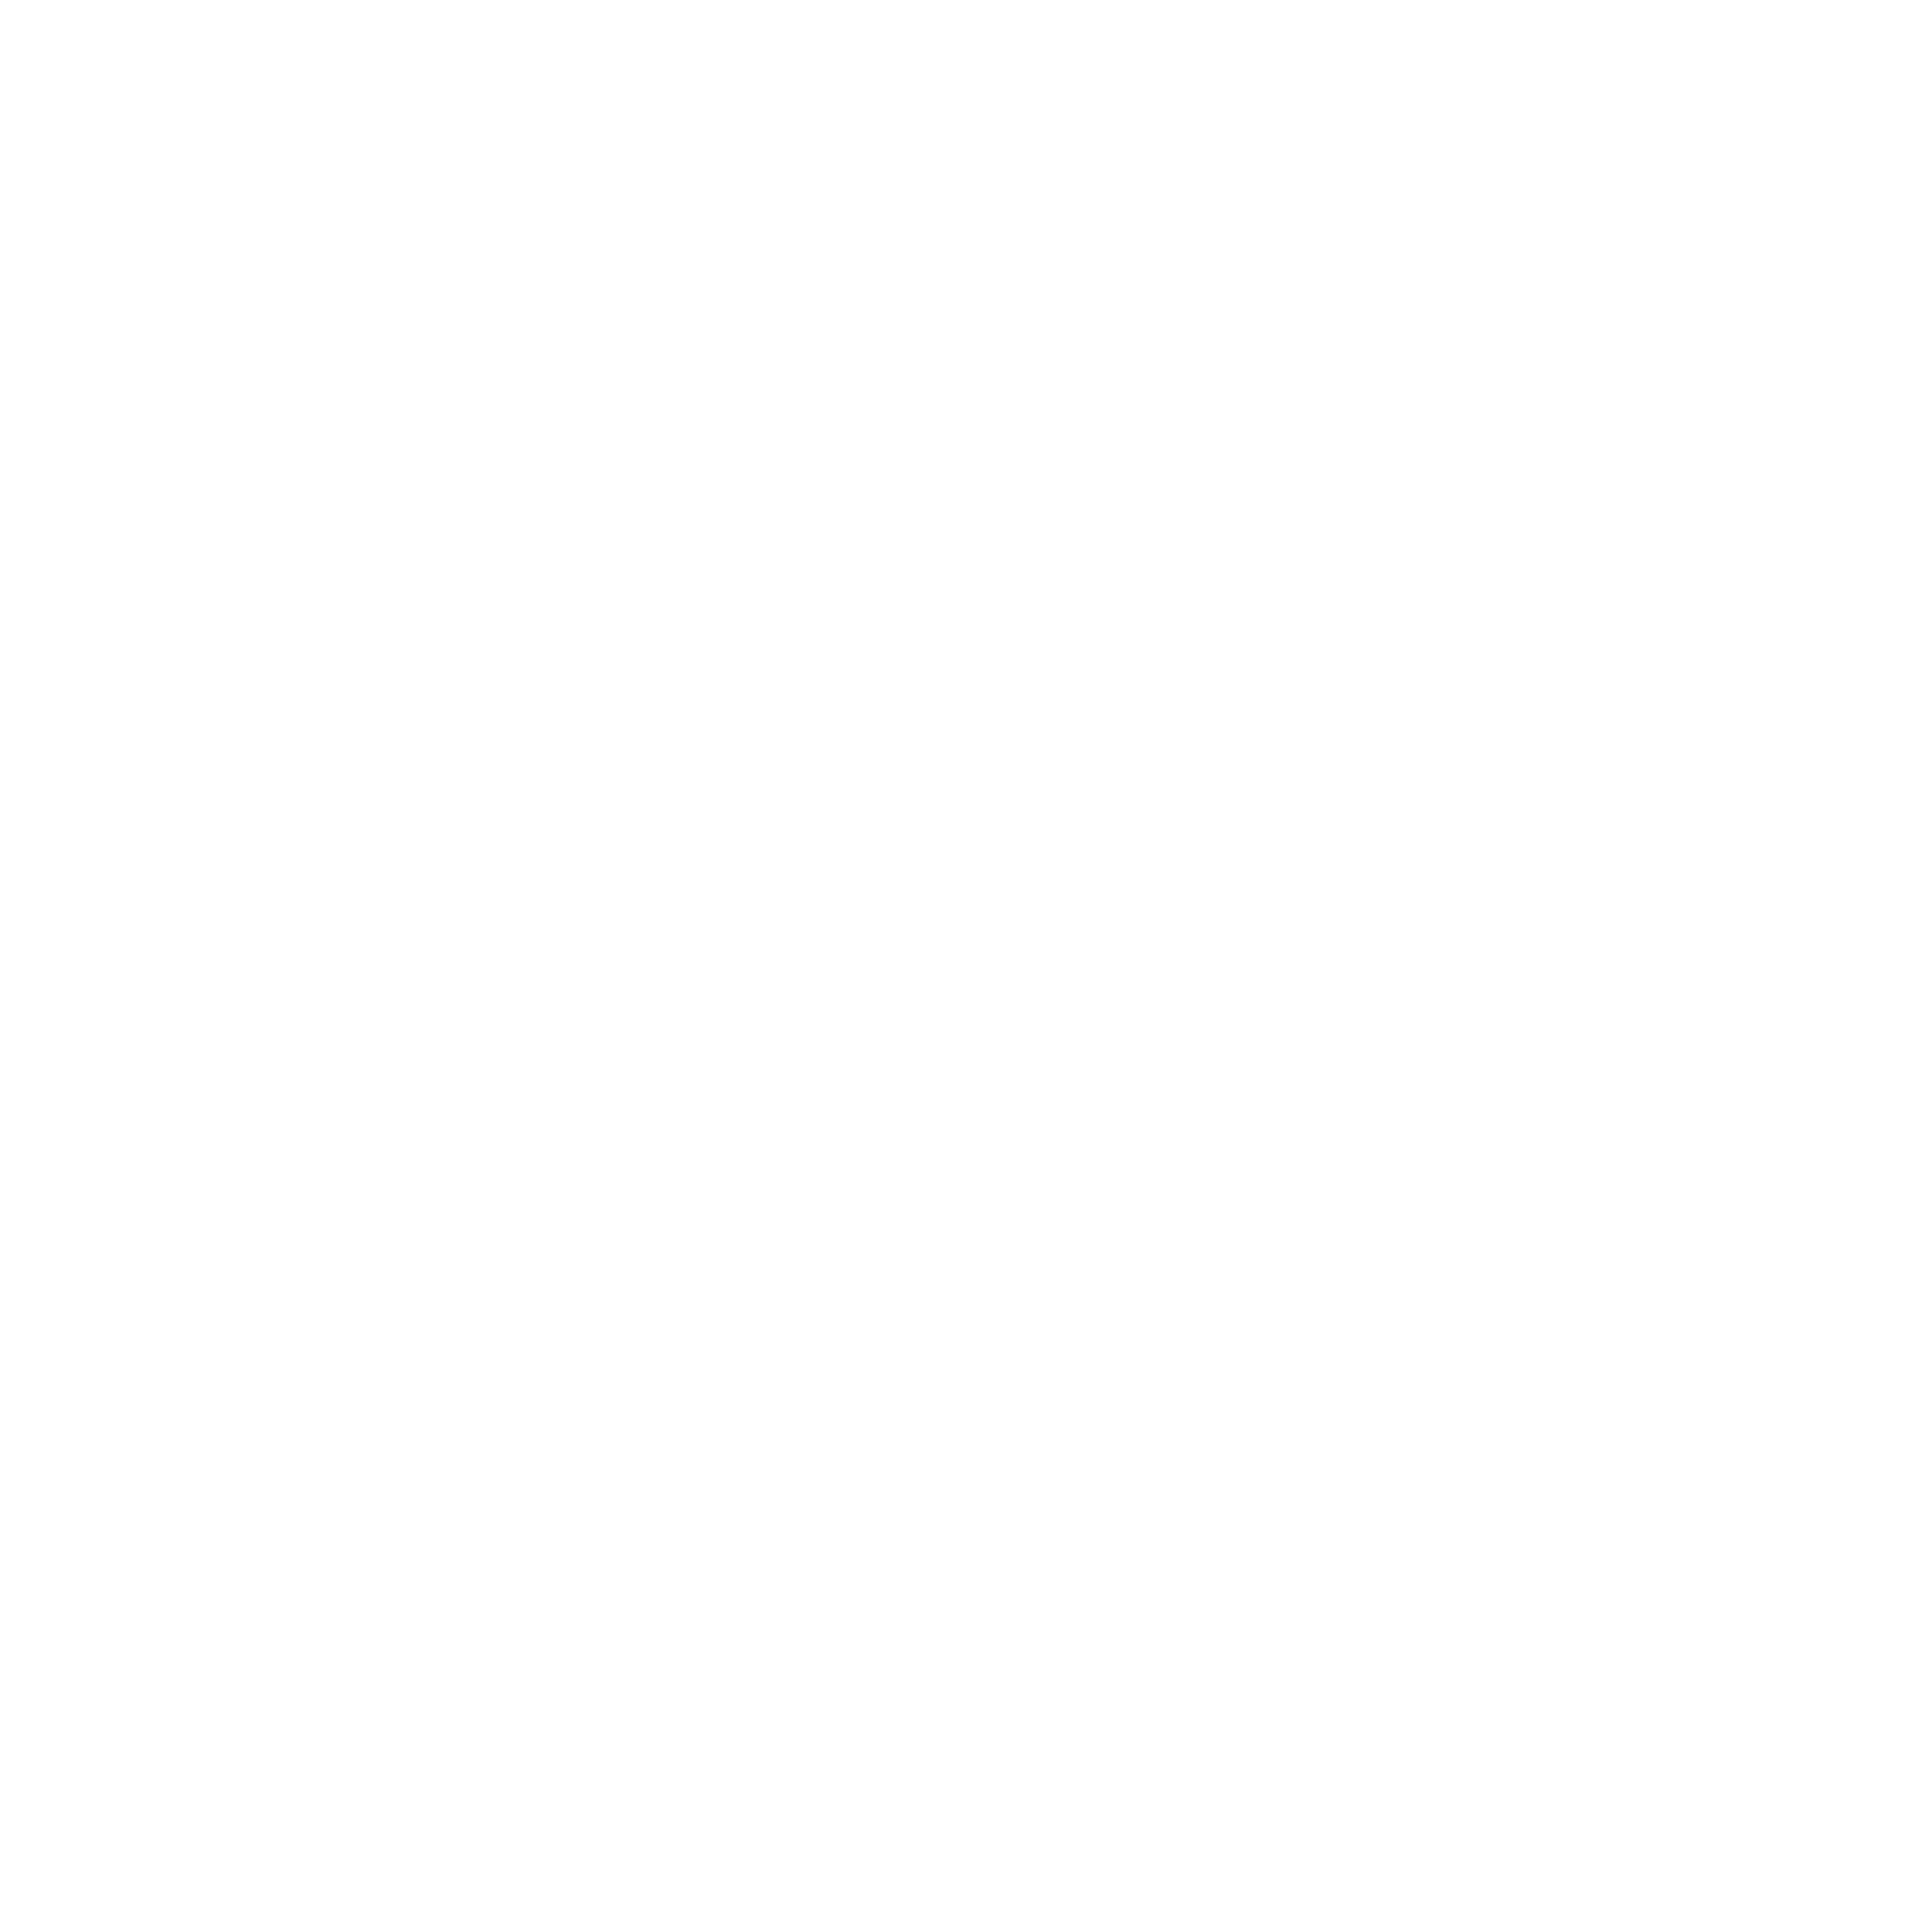 Zerorez Calgary's patented process keeps your home cleaner for longer.